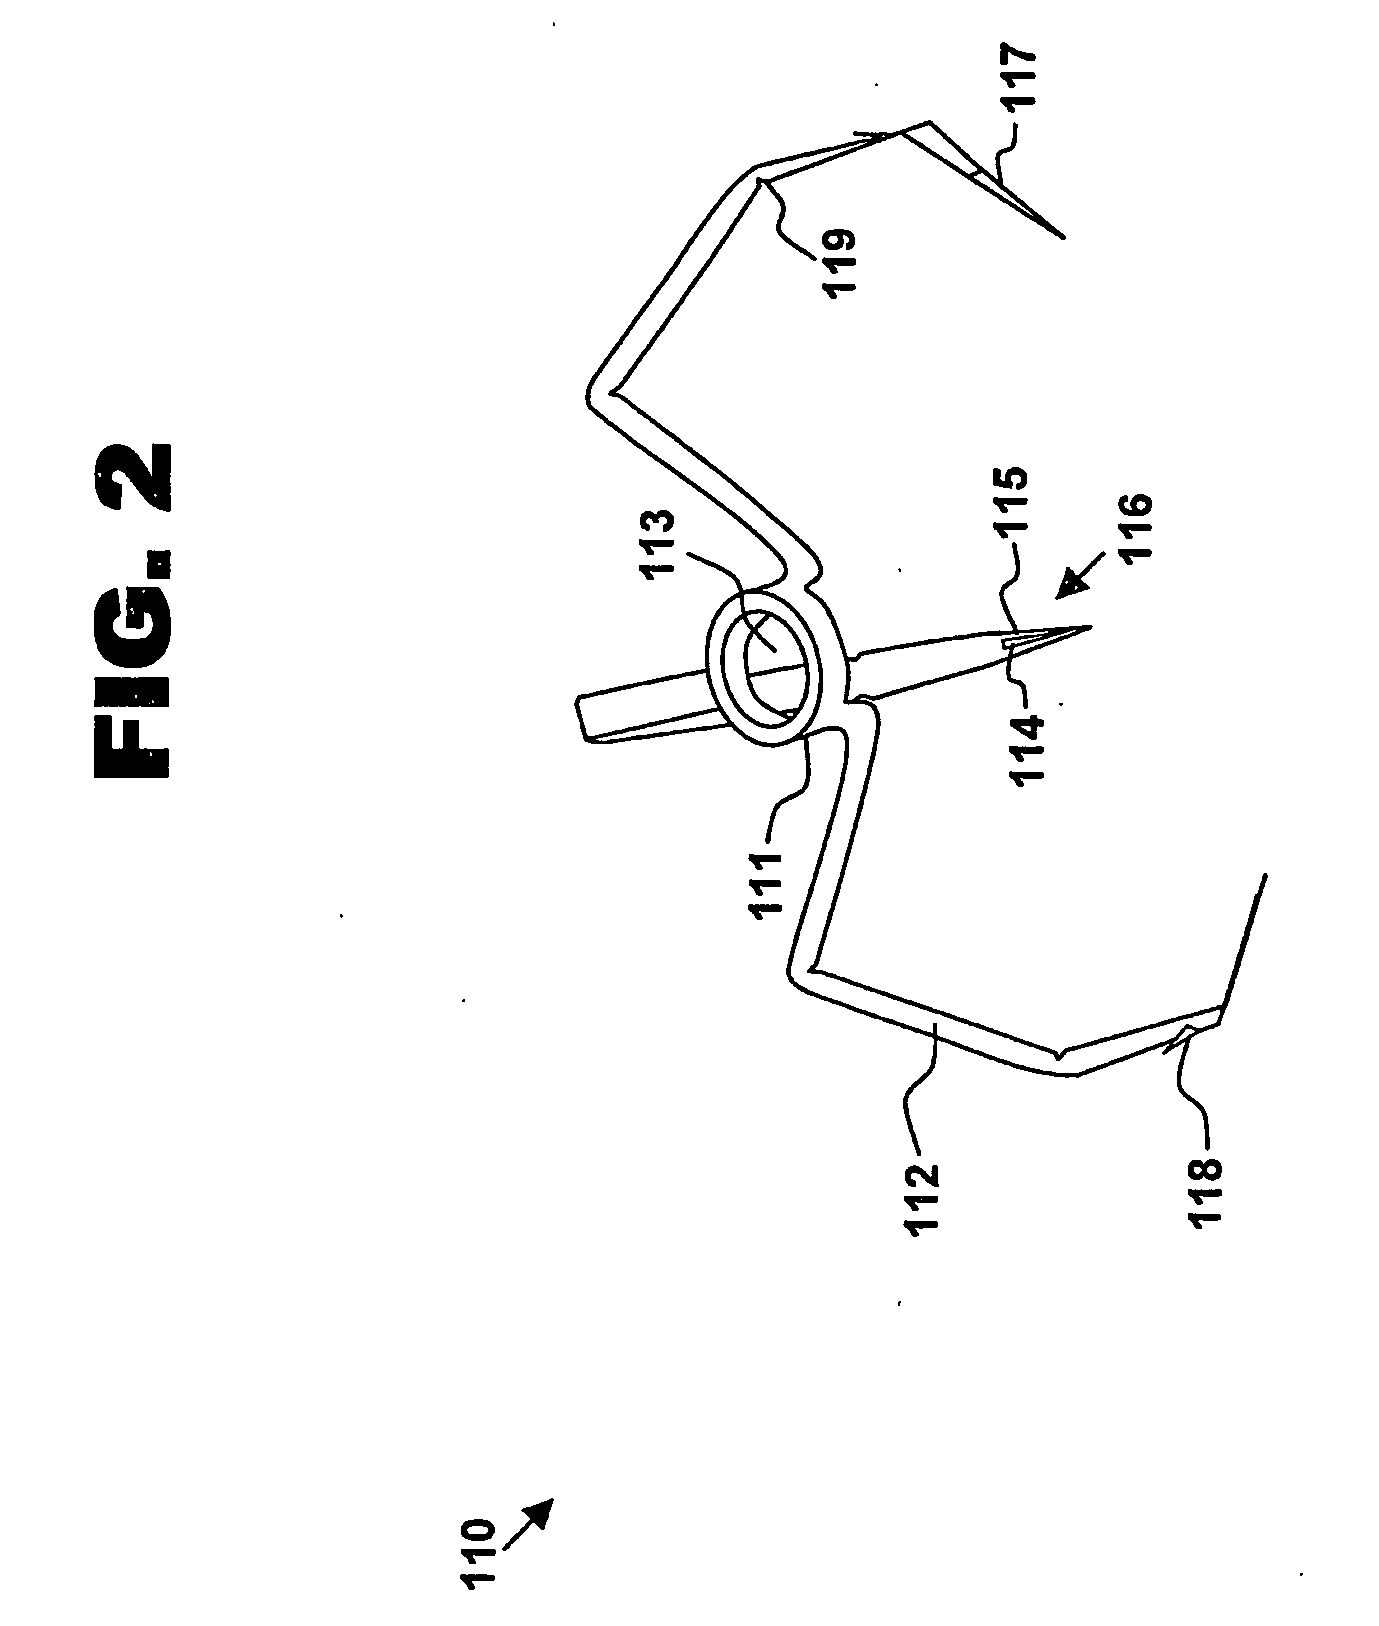 Device, system, and method for contracting tissue in a mammalian body